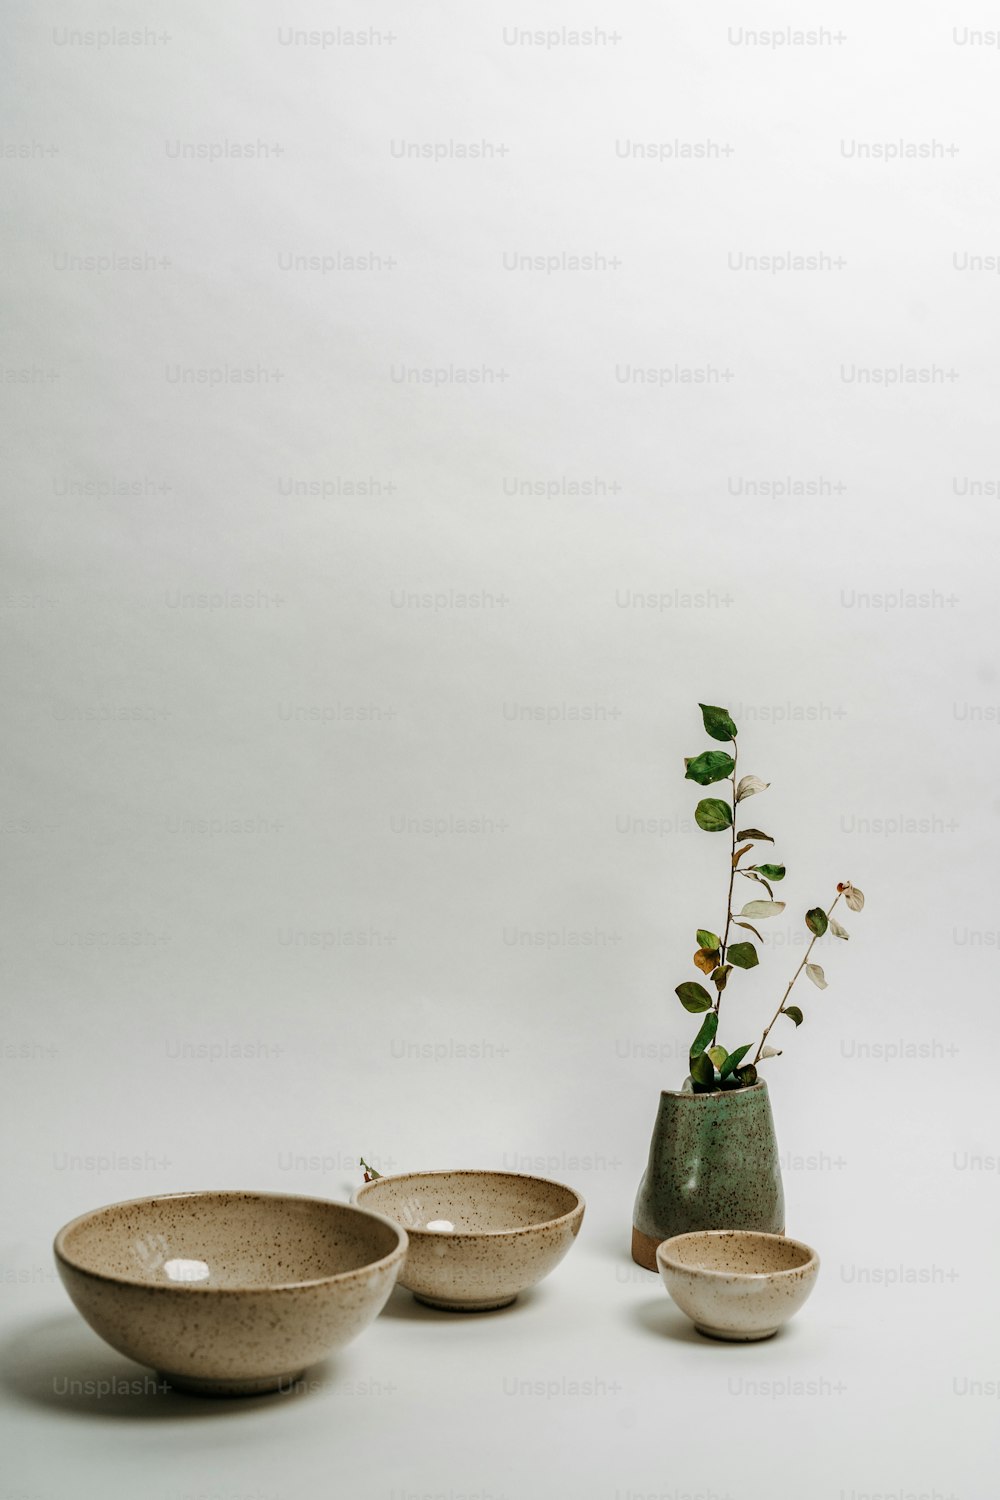 a couple of bowls sitting next to a vase with a plant in it